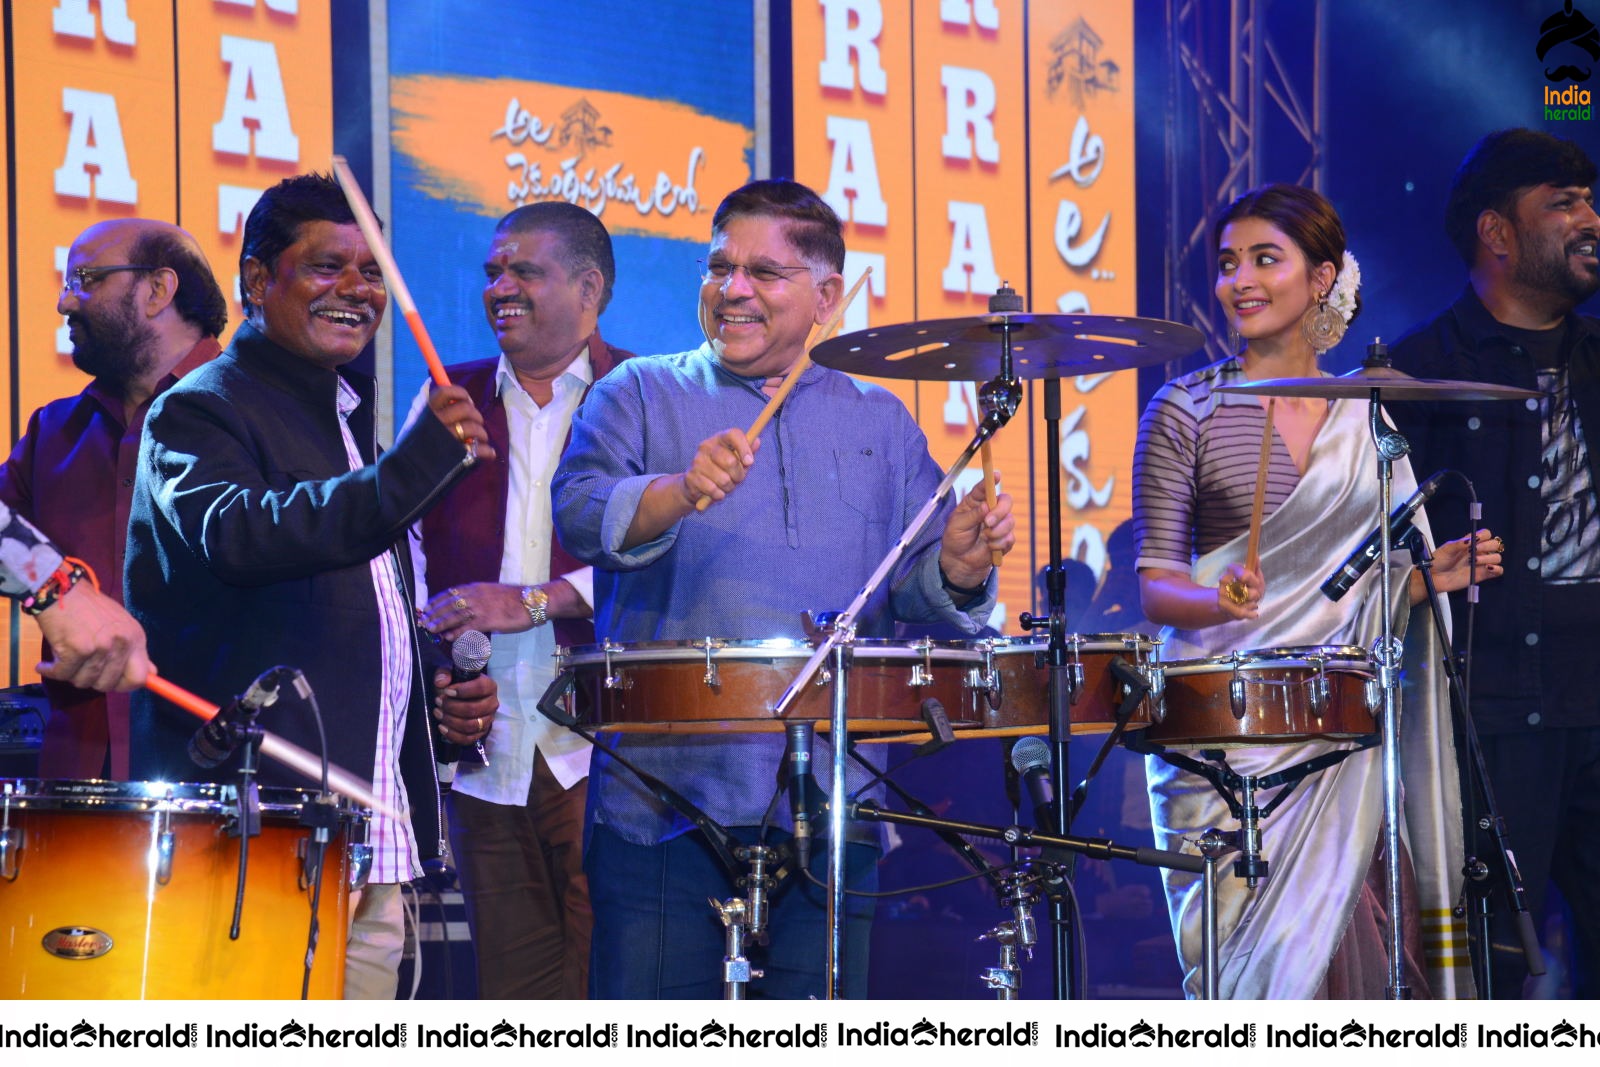 When Pooja Hegde started playing drums along with Sivamani Set 1